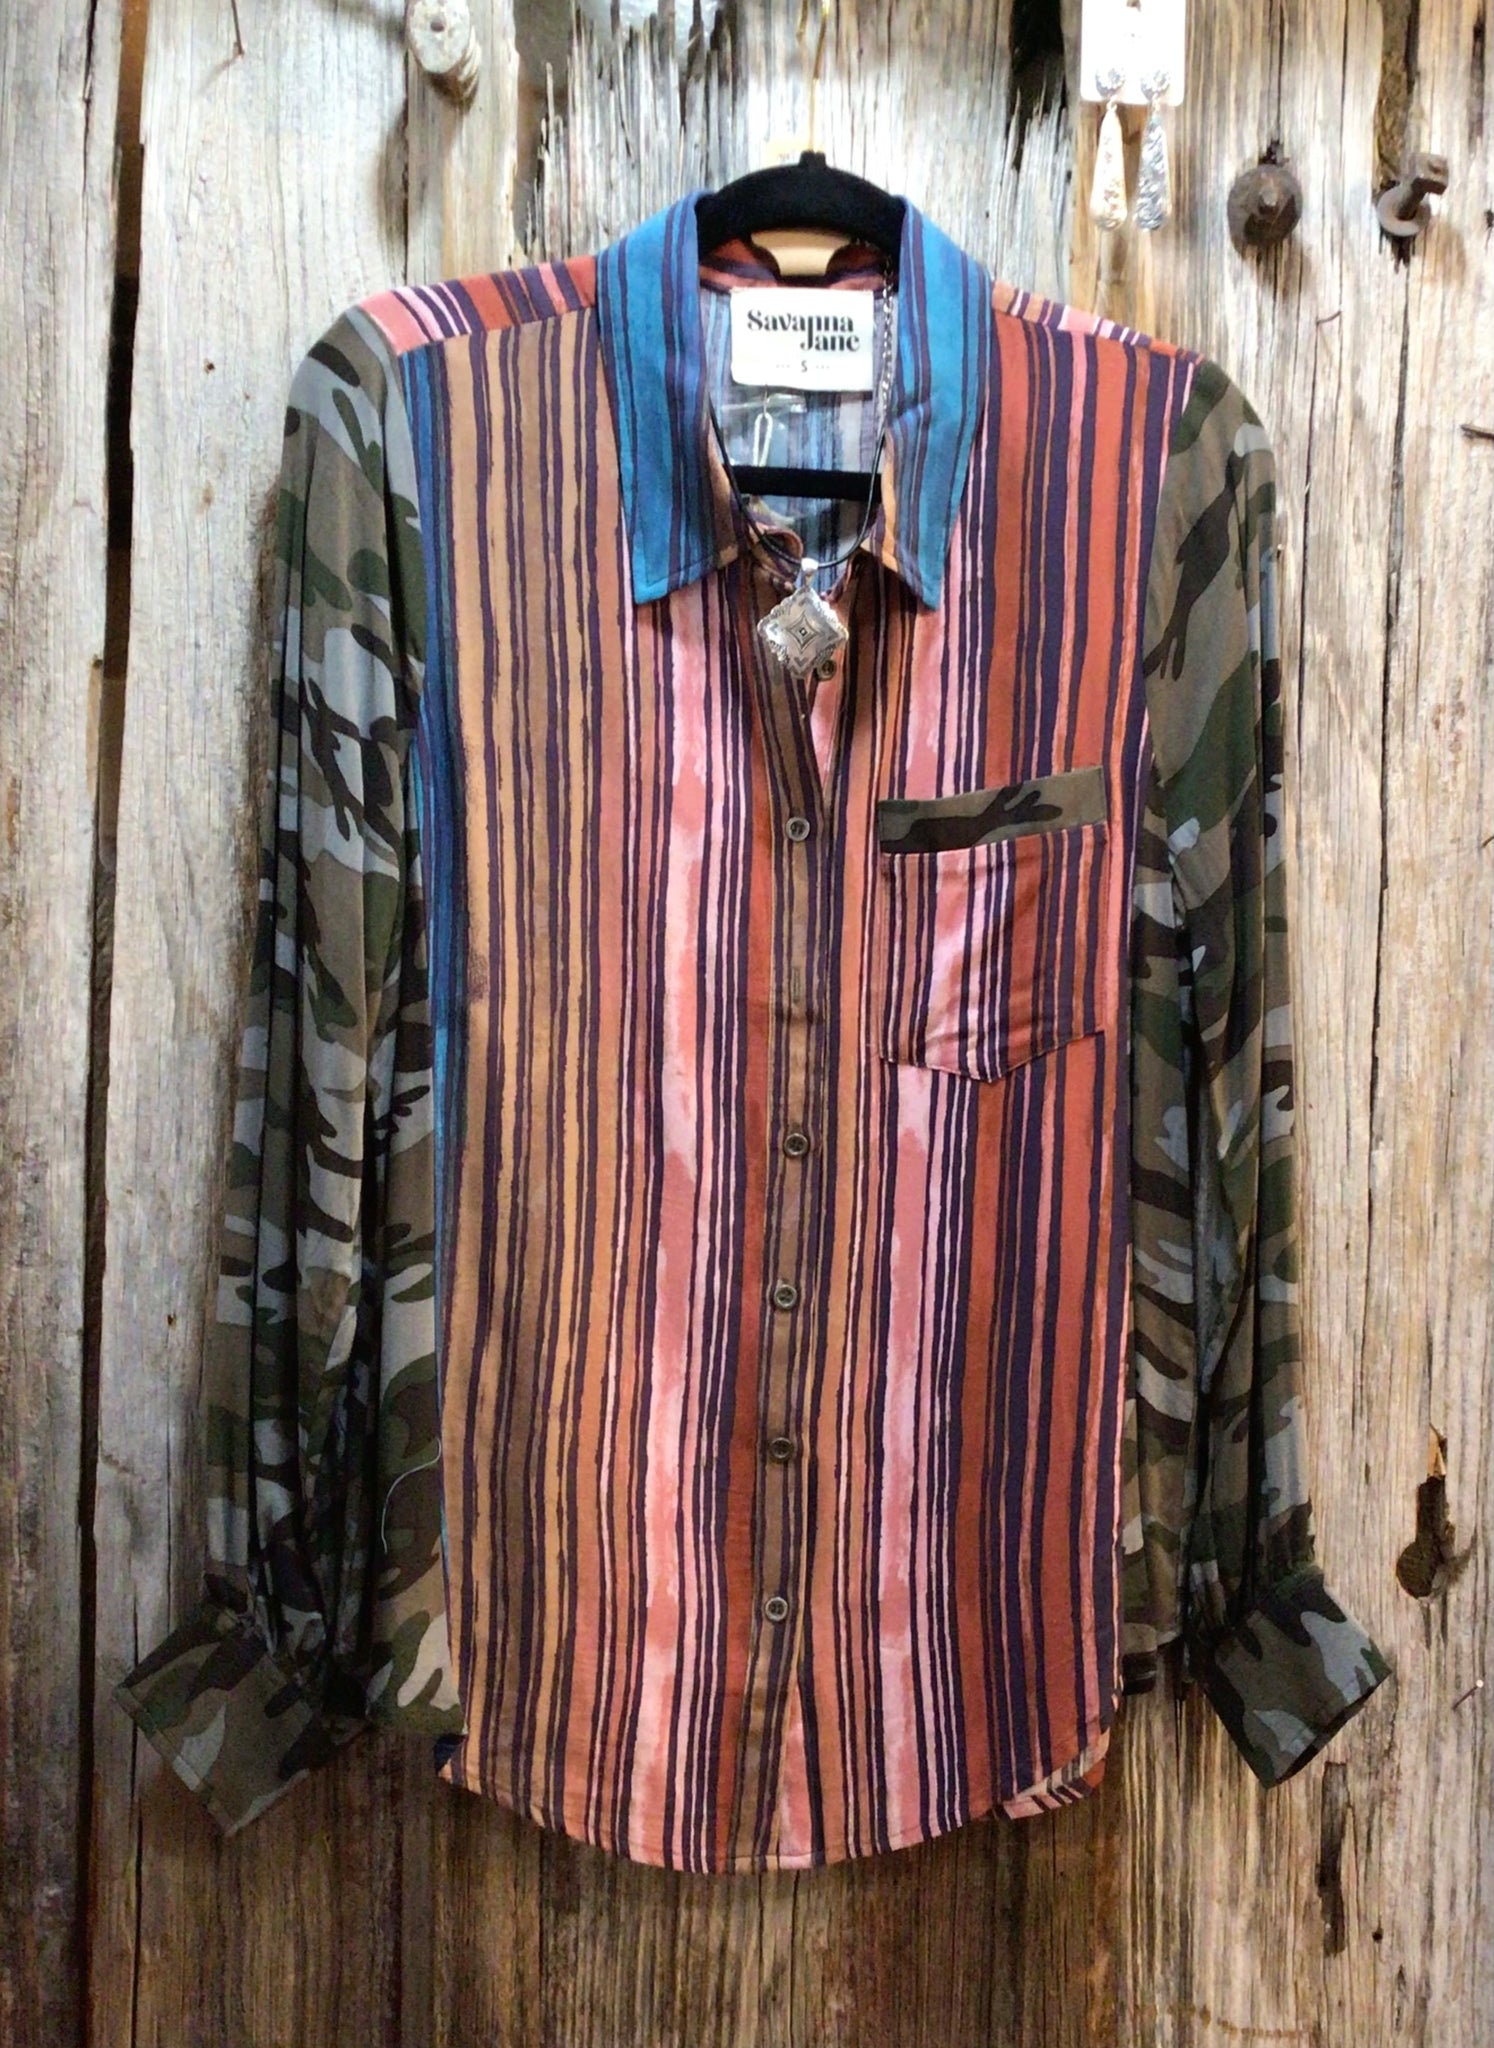 Stripe Top with Camo Sides & Sleeves